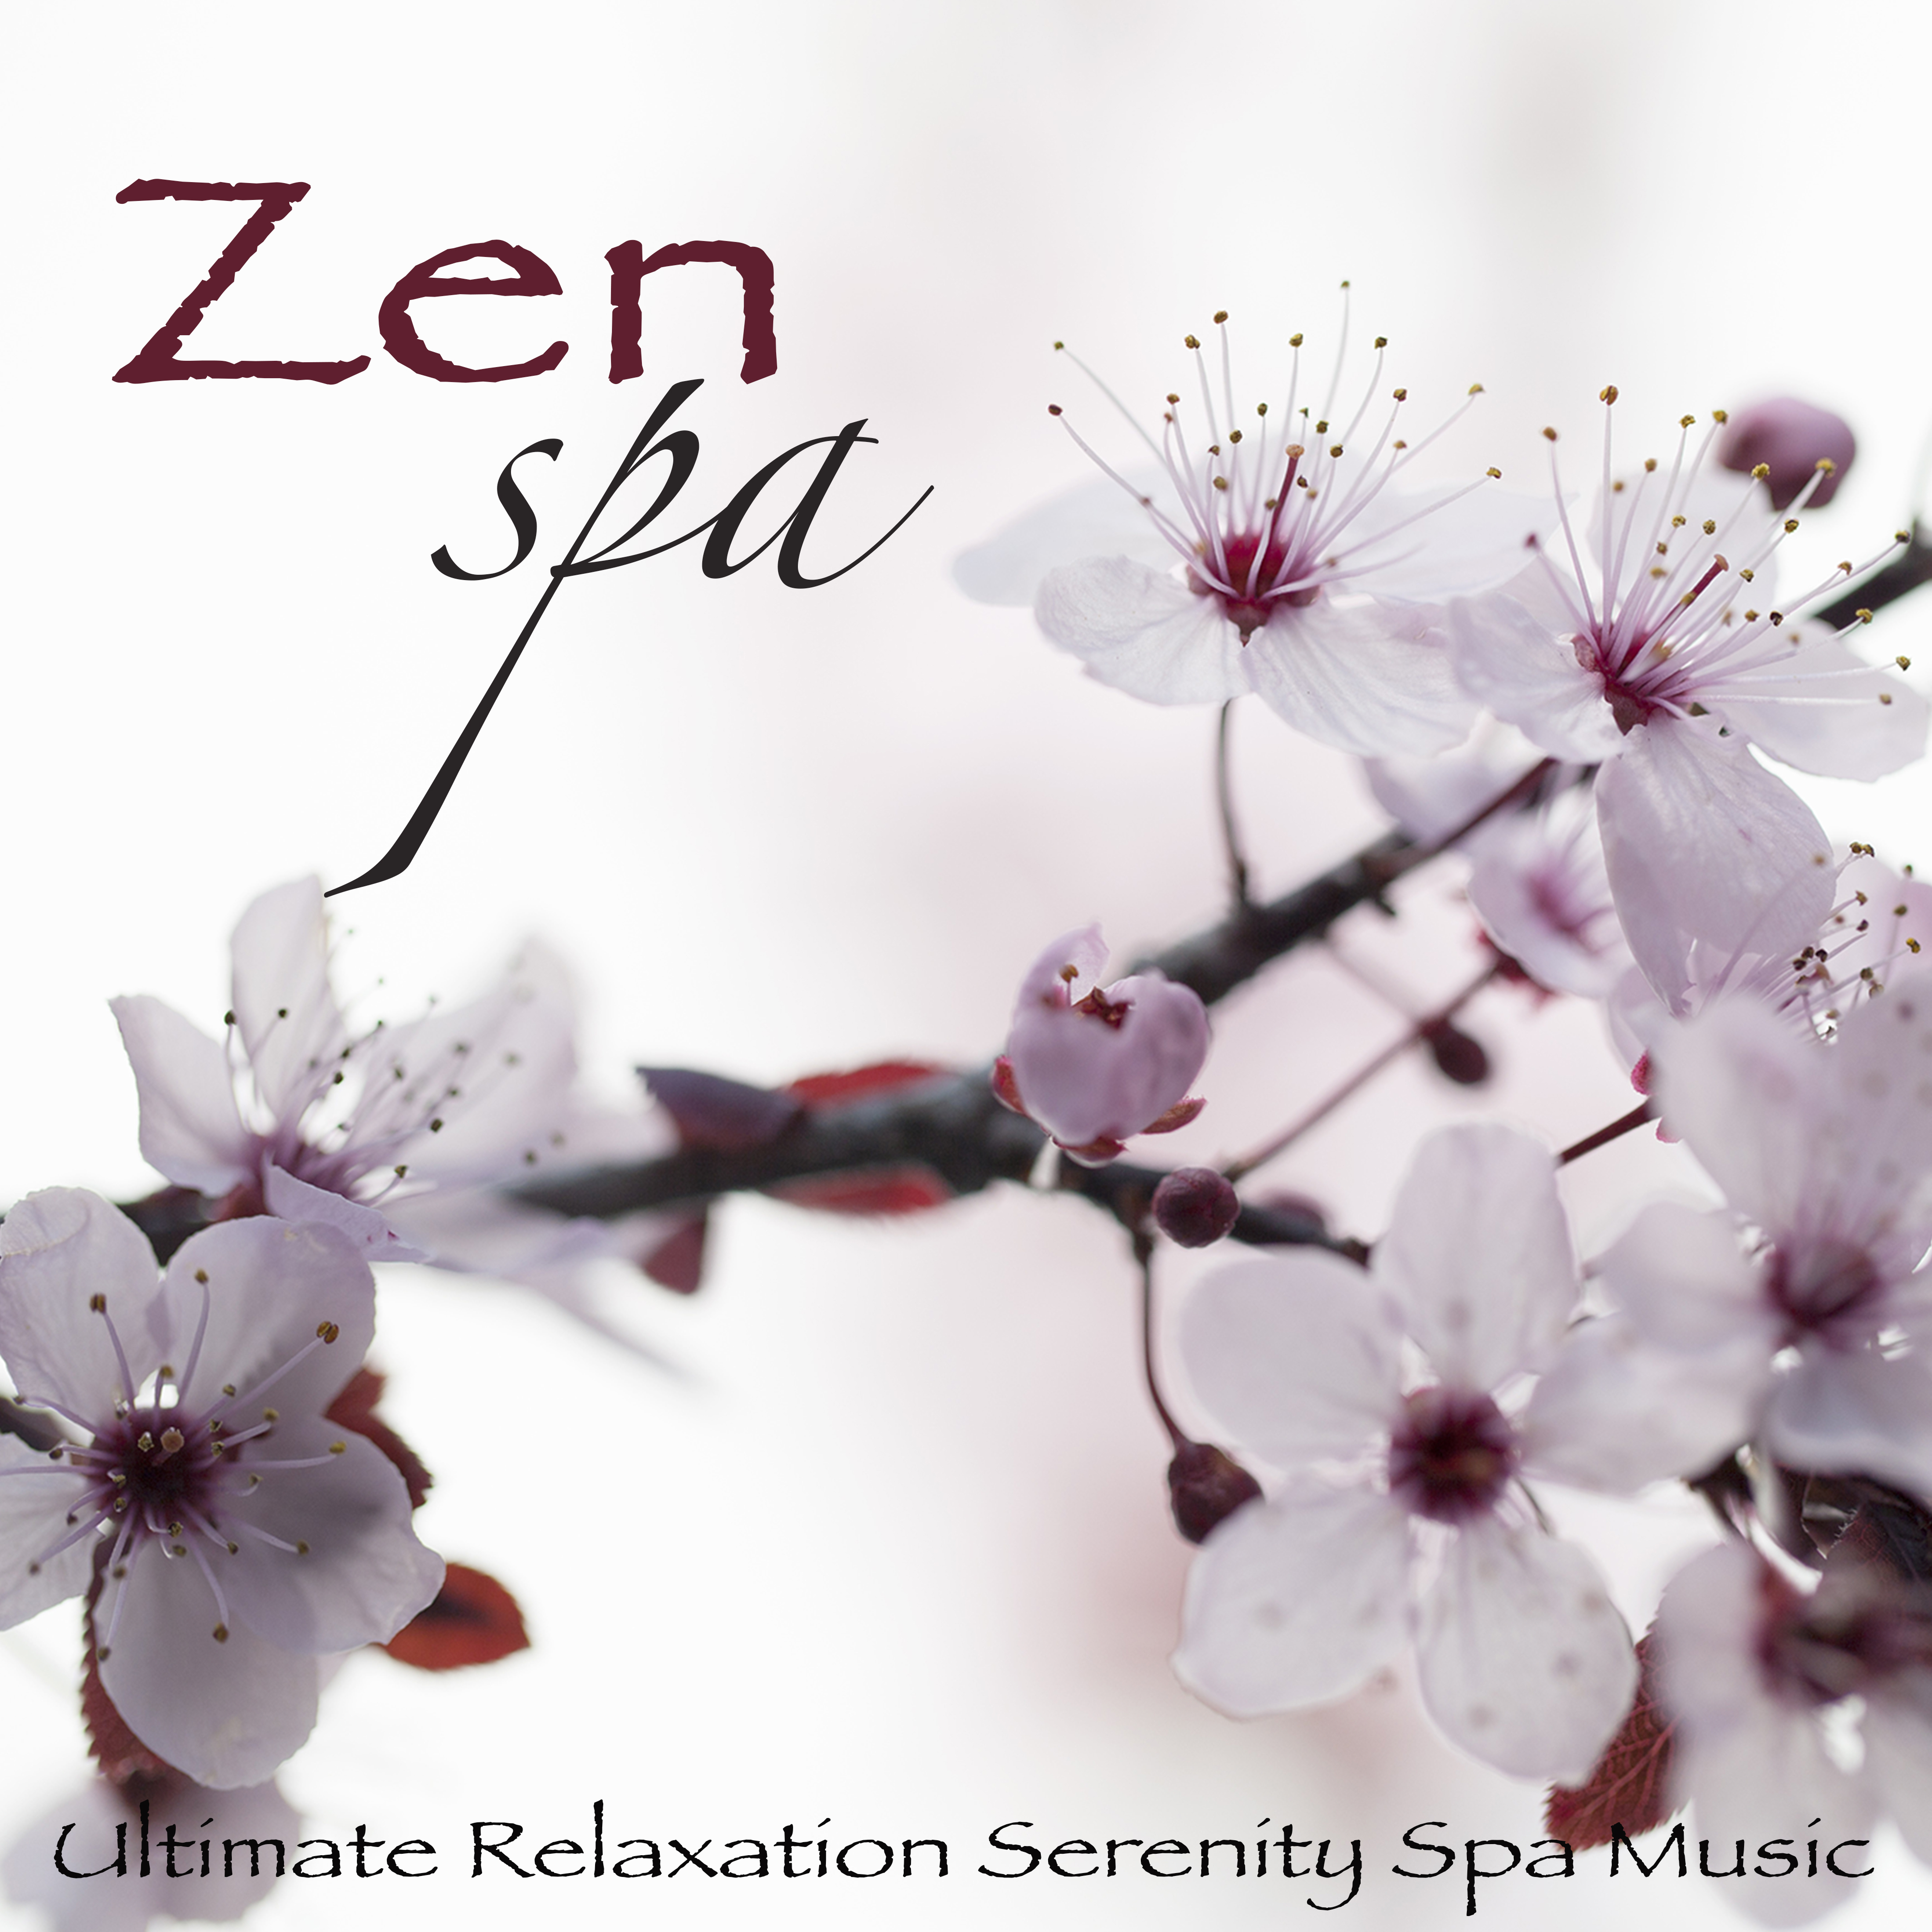 Zen Spa - Ultimate Relaxation Serenity Spa Music, Amazing Peaceful Songs Collection